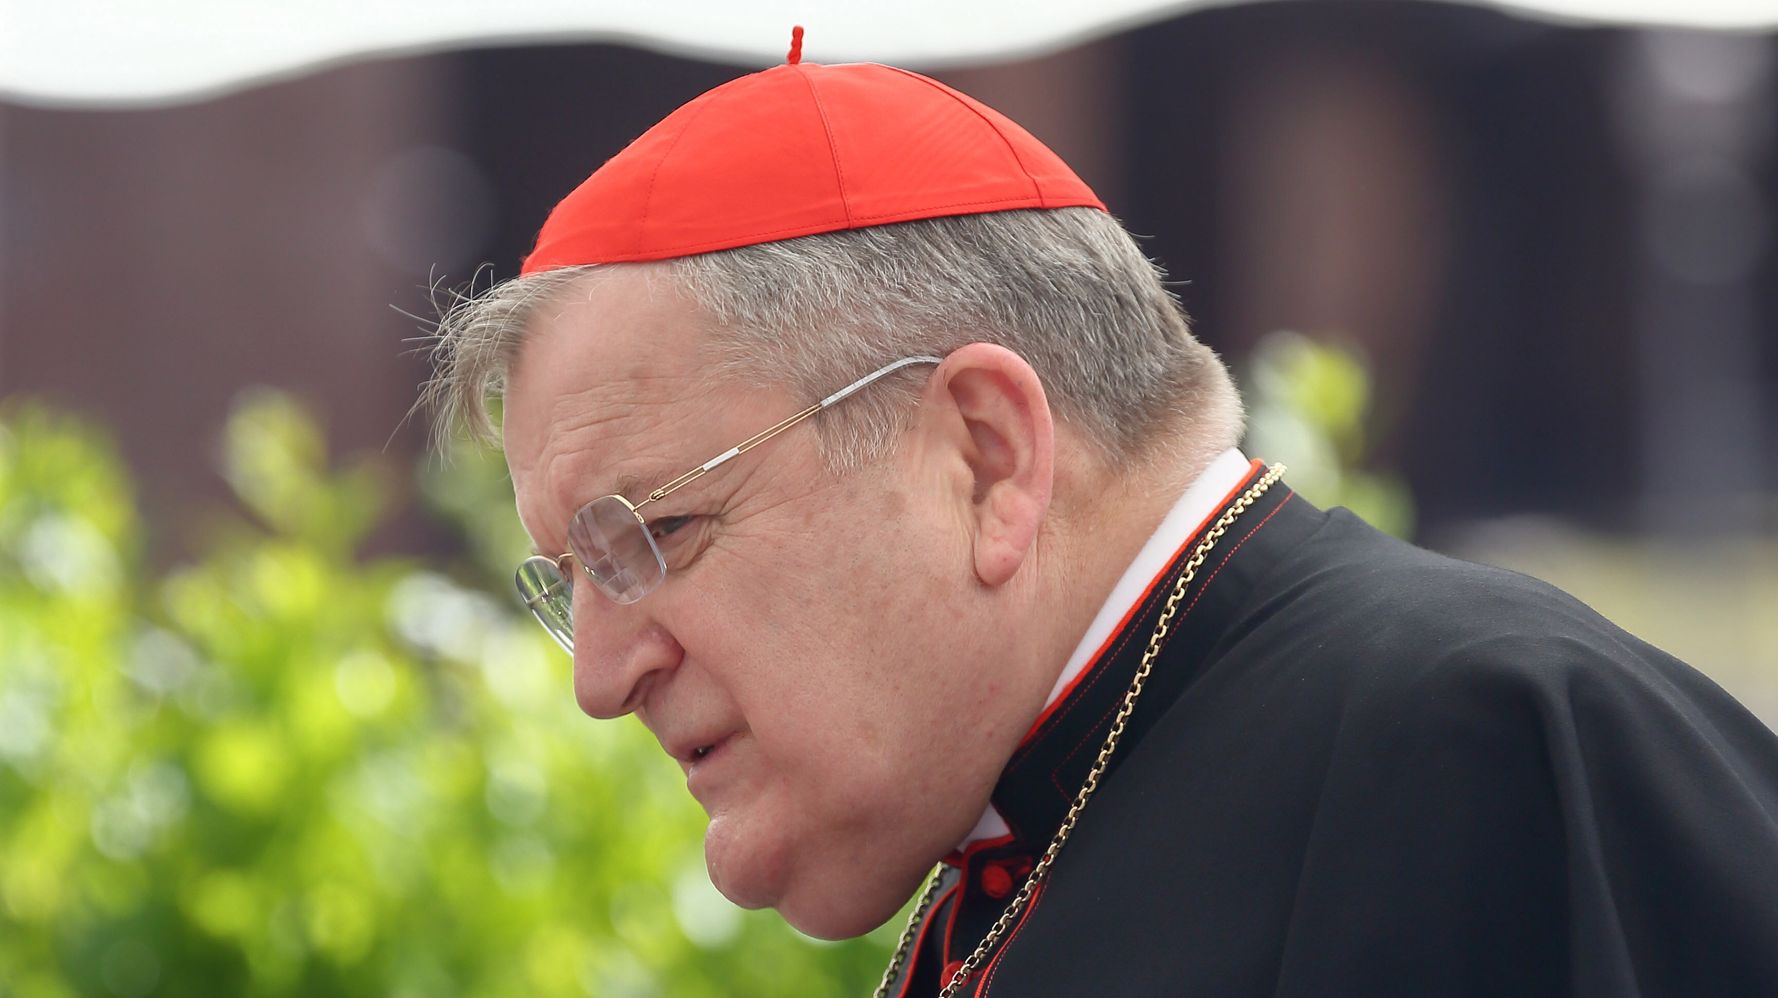 Cardinal Who Expressed Skepticism About Vaccines Has COVID-19, Is On Ventilator